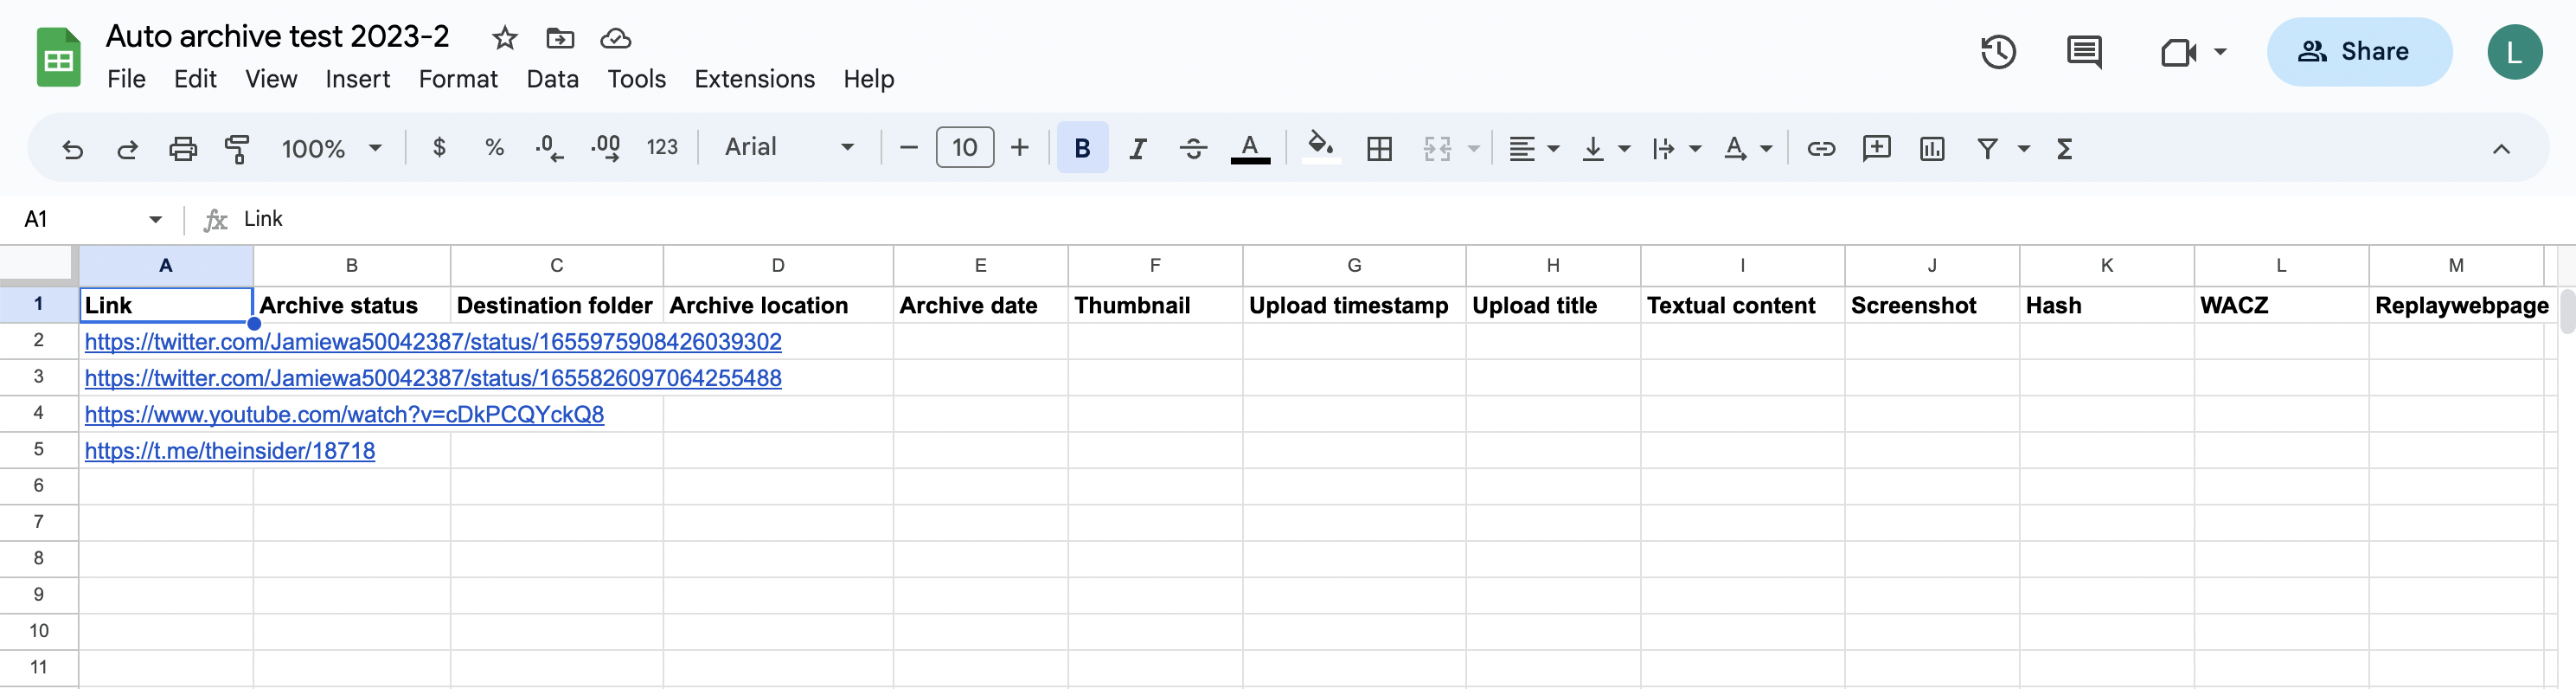 A screenshot of a Google Spreadsheet with column headers defined as above, and several Youtube and Twitter URLs in the "Link" column